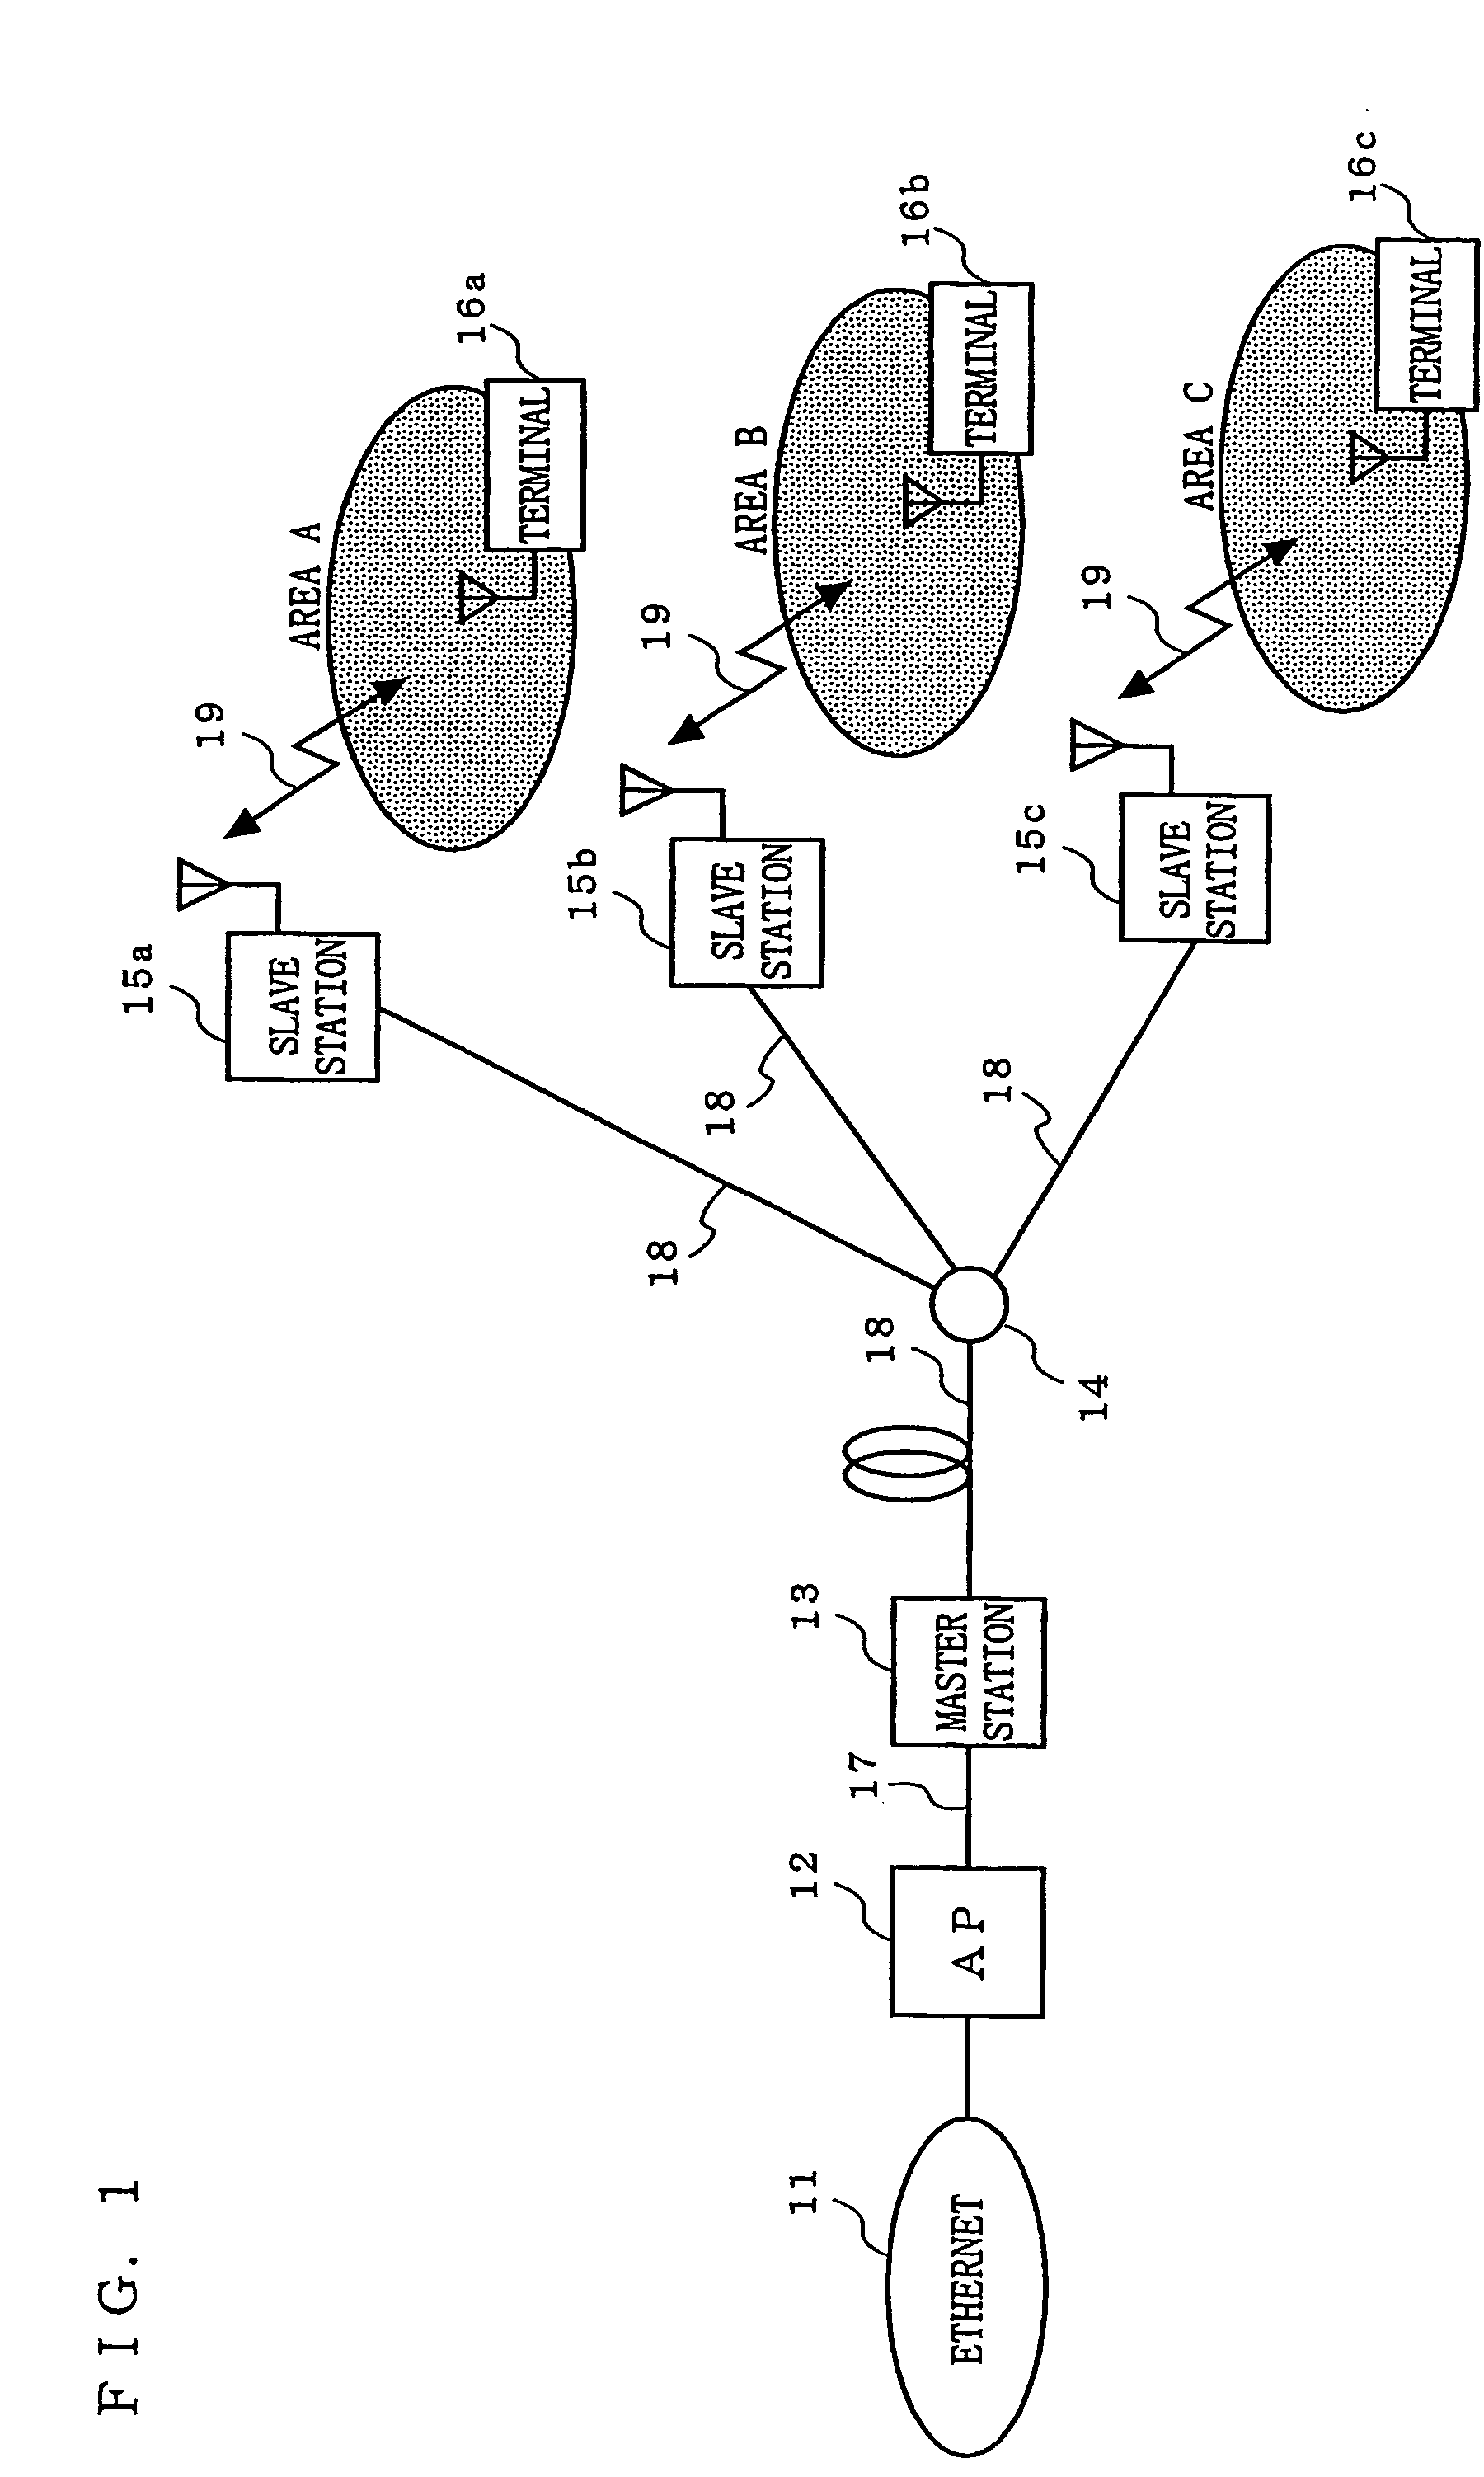 Wireless access system and method